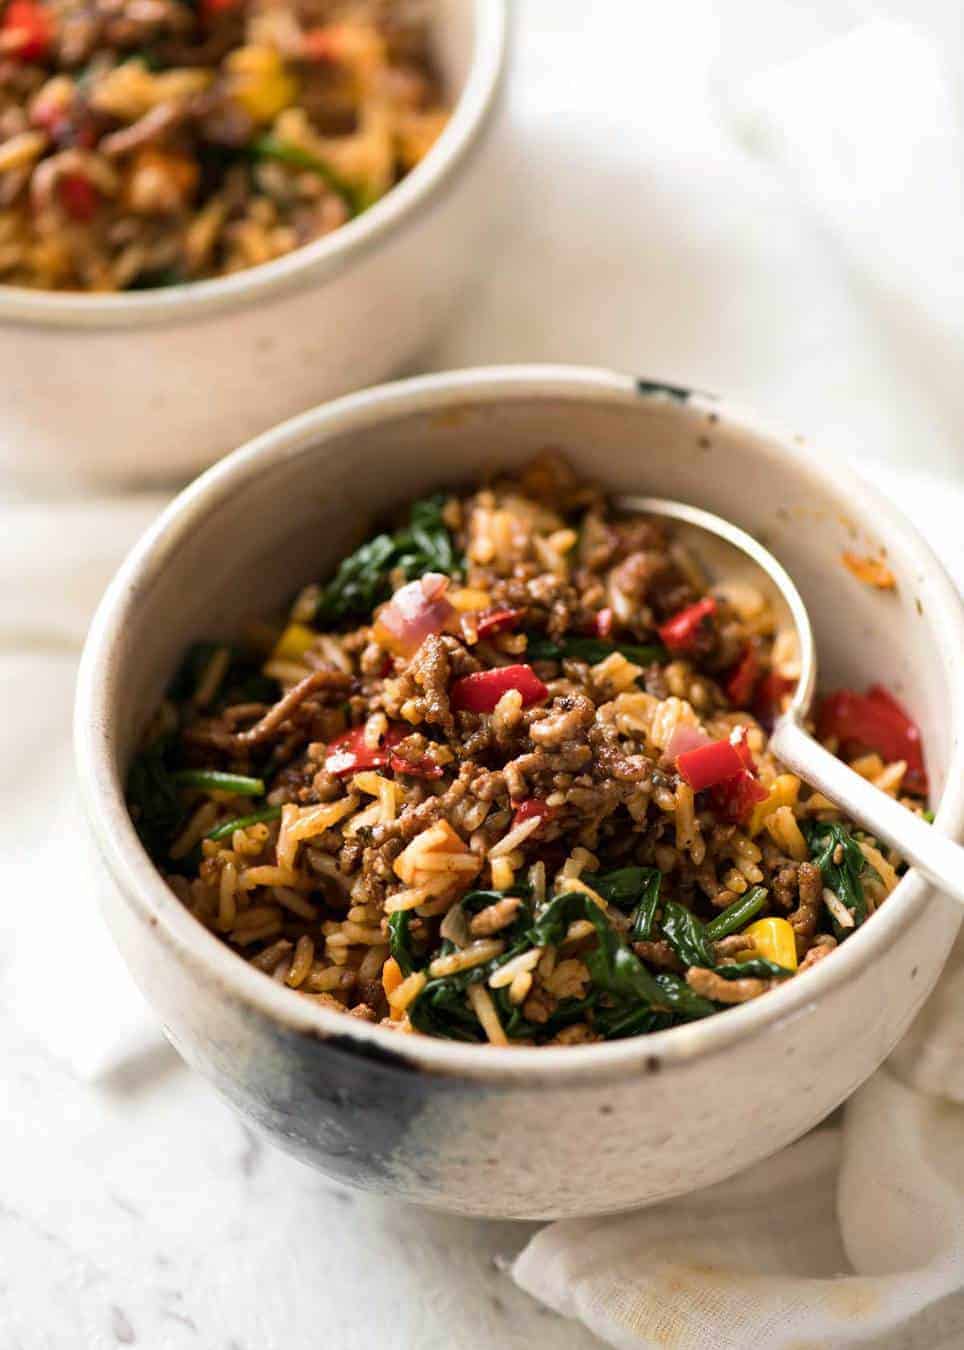 A quick, fabulous midweek meal - this ground Beef and Rice is made by browning ground beef, then cooking it with flavoured rice and loads of veggies. Irresistibly delicious! www.recipetineats.com